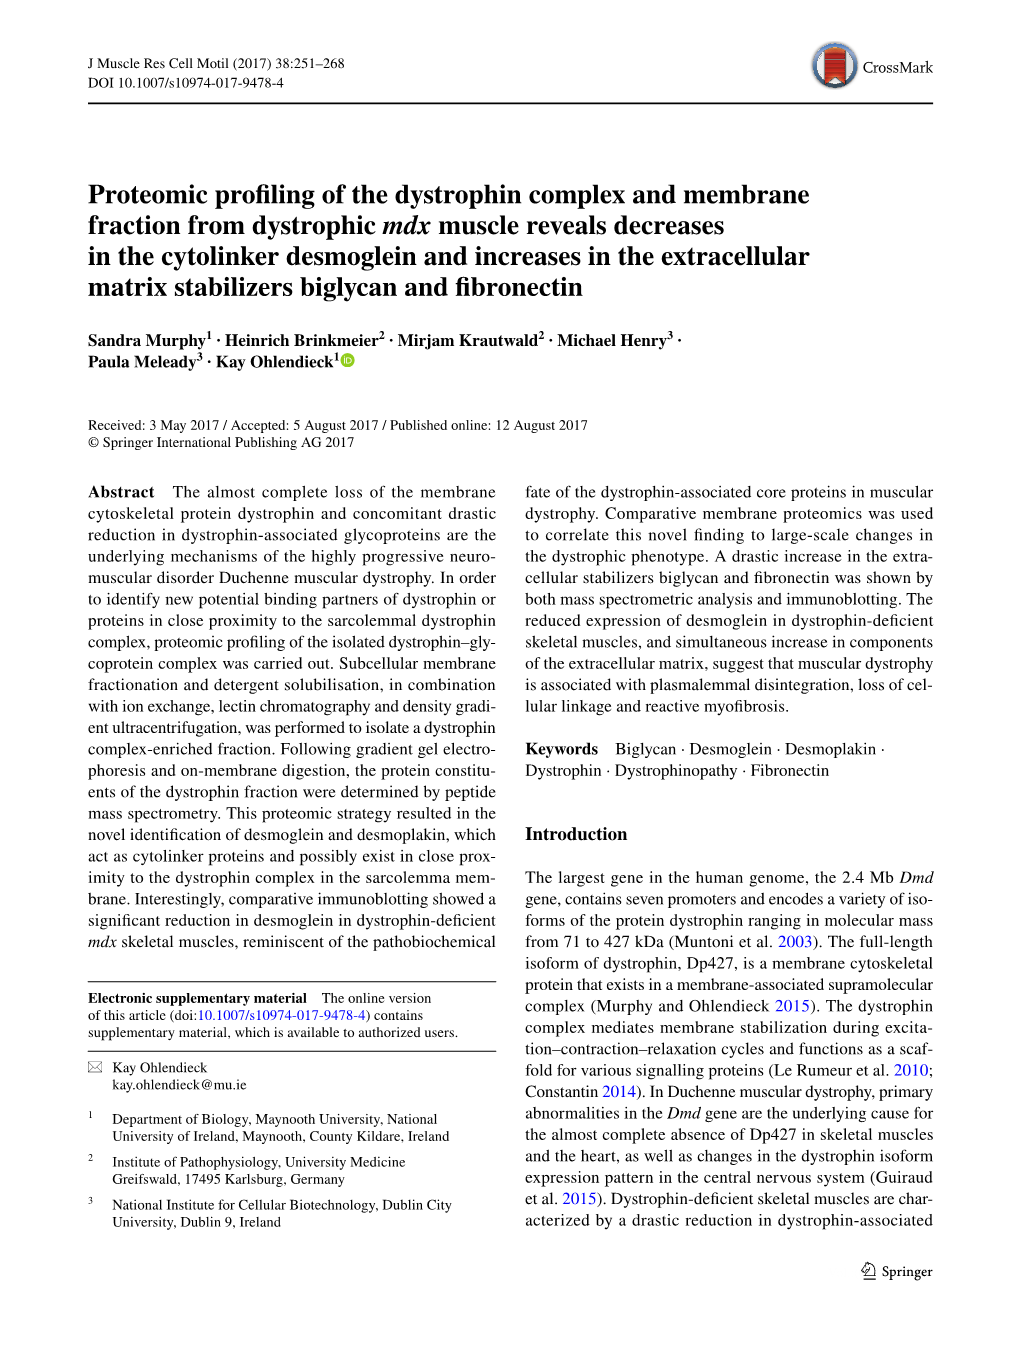 Proteomic Profiling of the Dystrophin Complex and Membrane Fraction